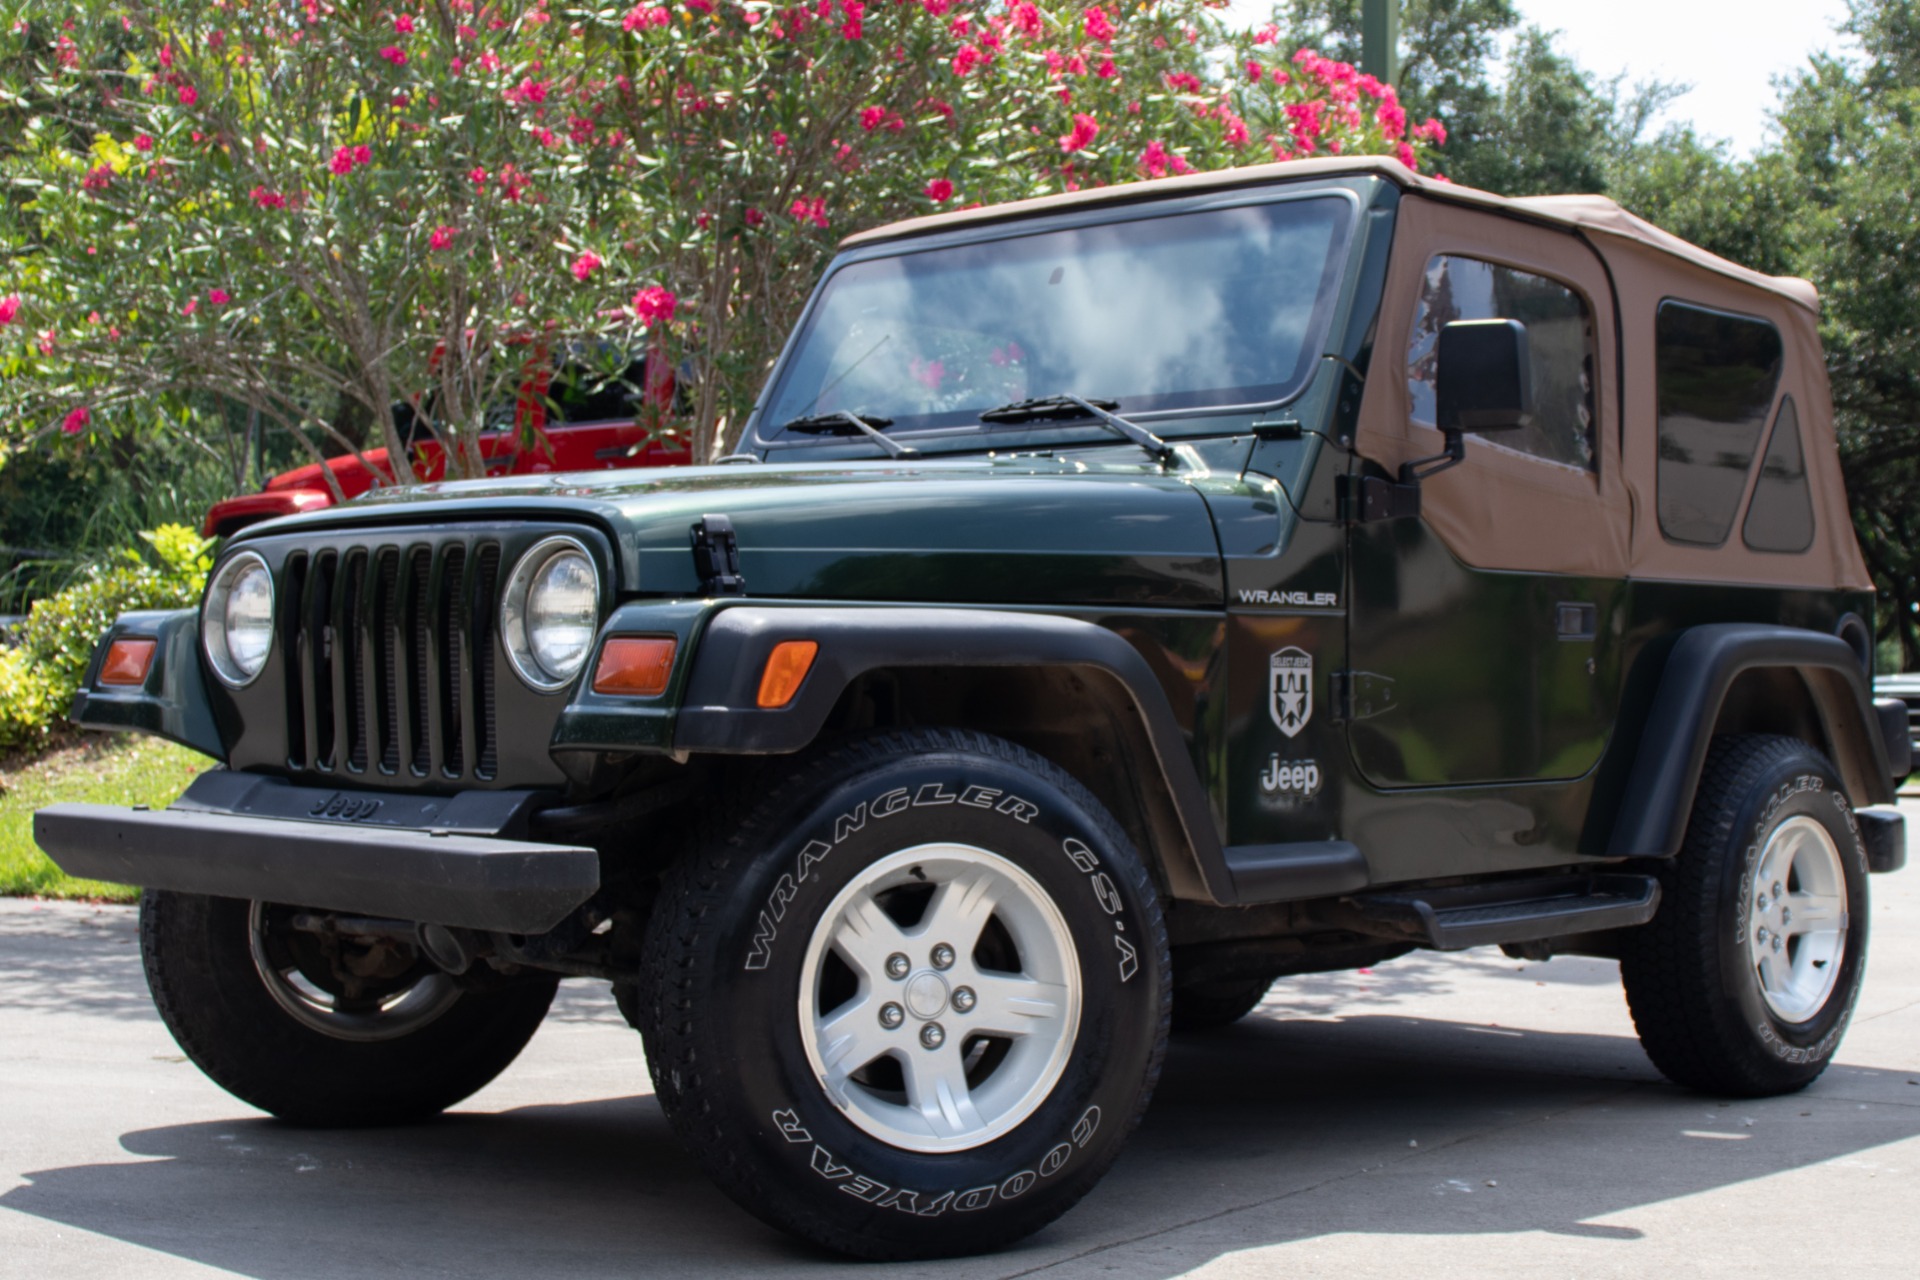 Used 1997 Jeep Wrangler SE For Sale ($11,995) | Select Jeeps Inc. Stock  #472727